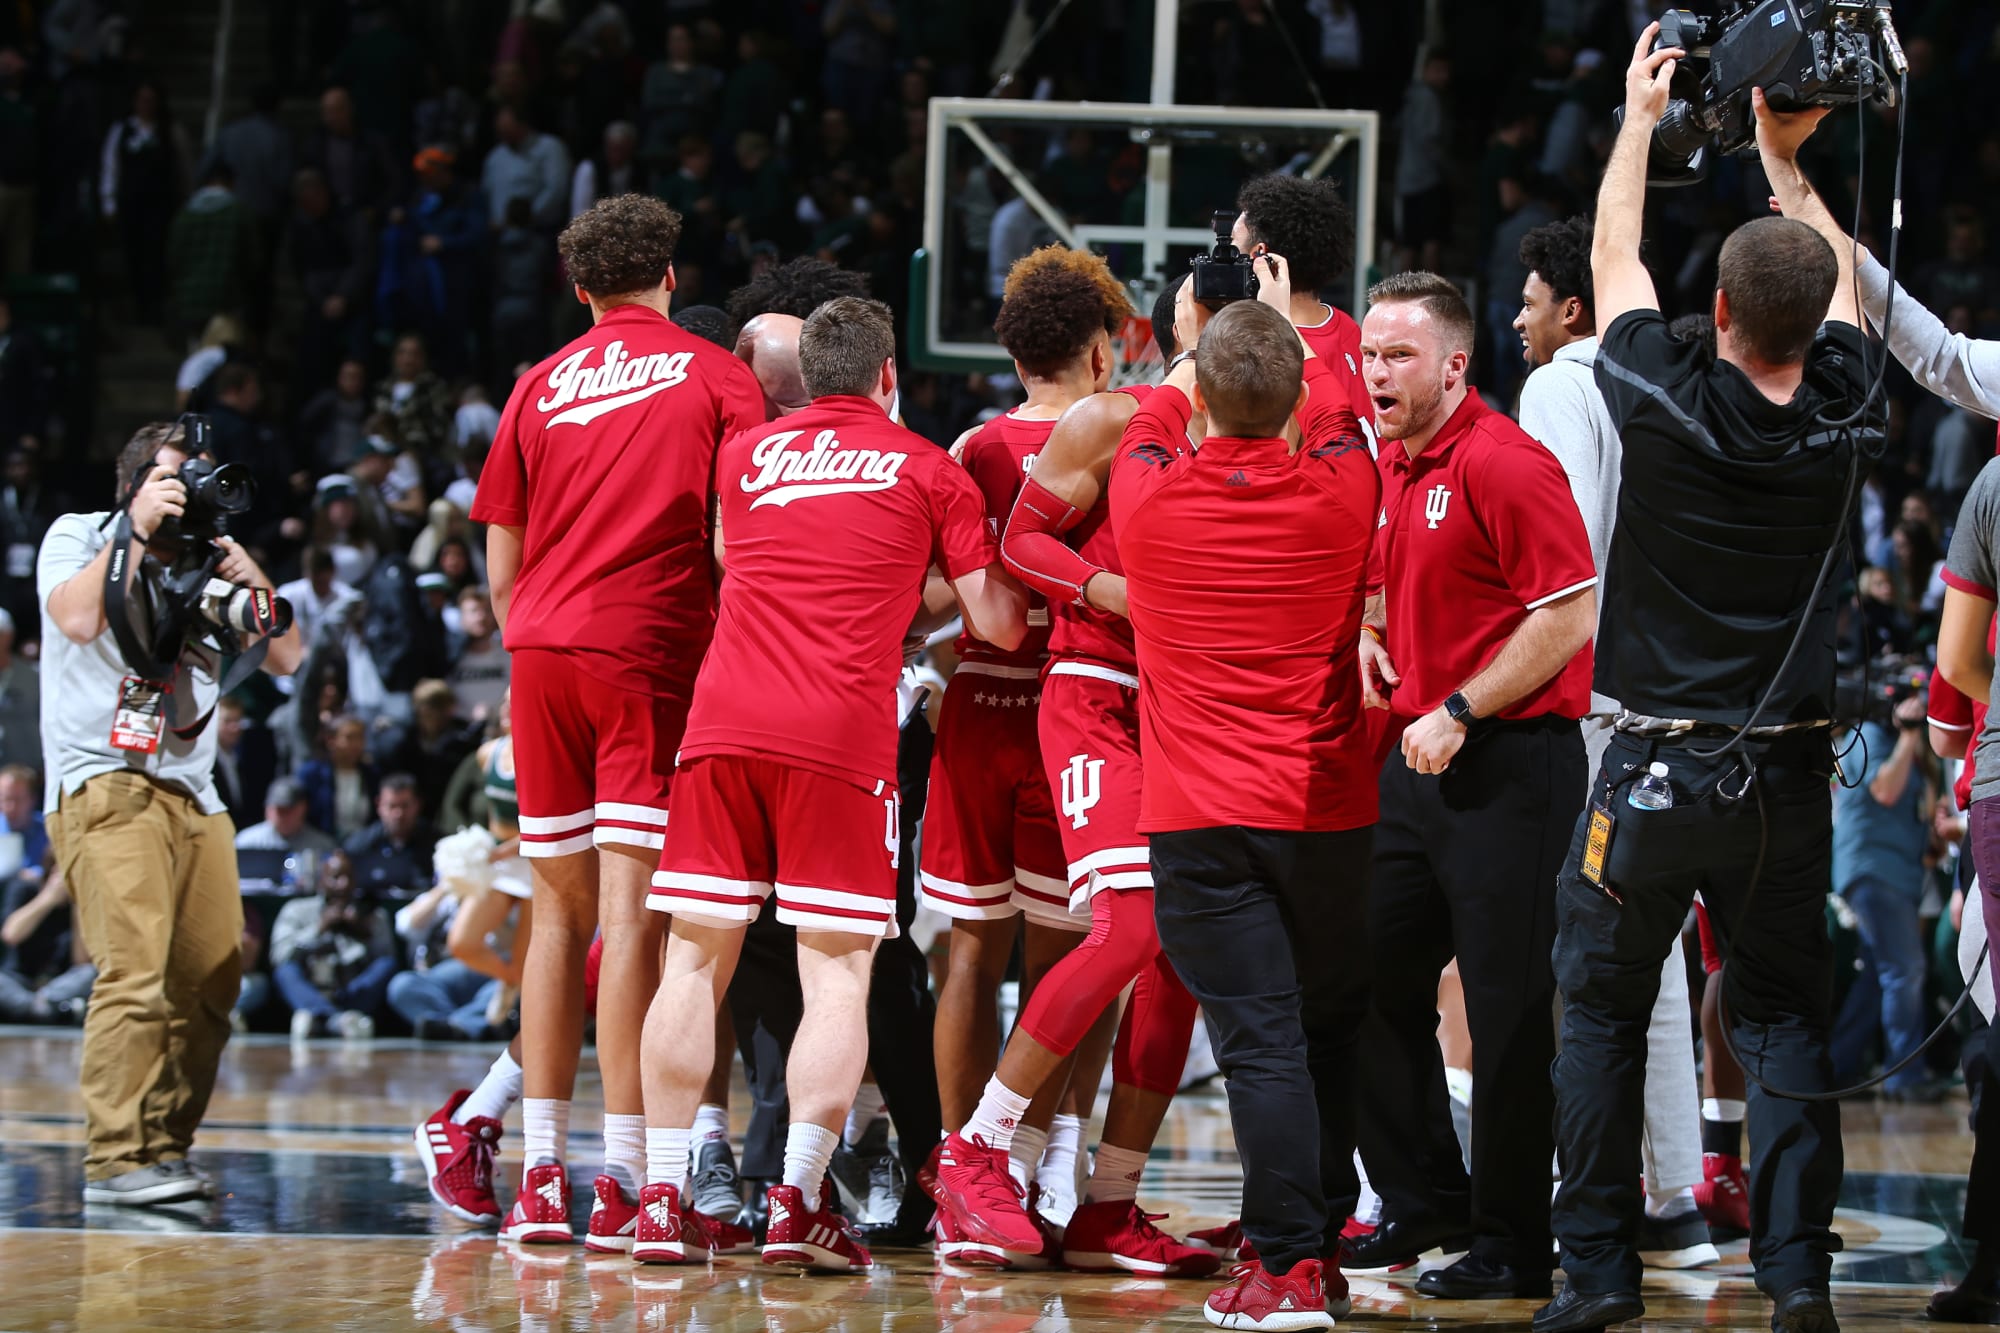 Indiana Basketball Hoosiers named top three most valuable college